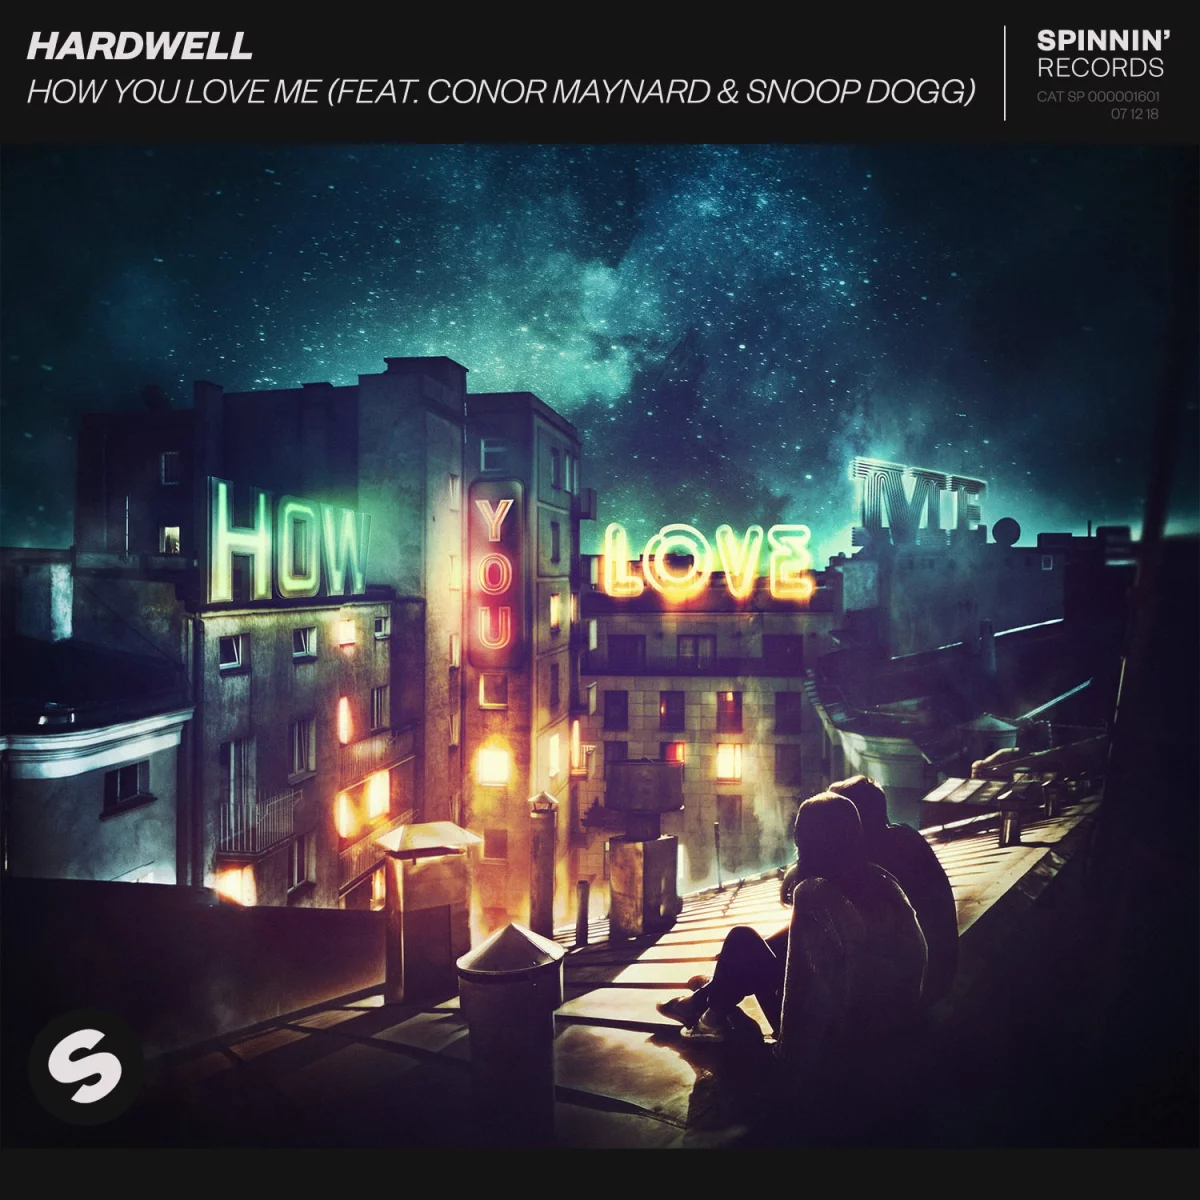 How You Love Me (feat. Conor Maynard & Snoop Dogg) - Hardwell⁠ Conor Maynard⁠ Snoop Dogg⁠ 